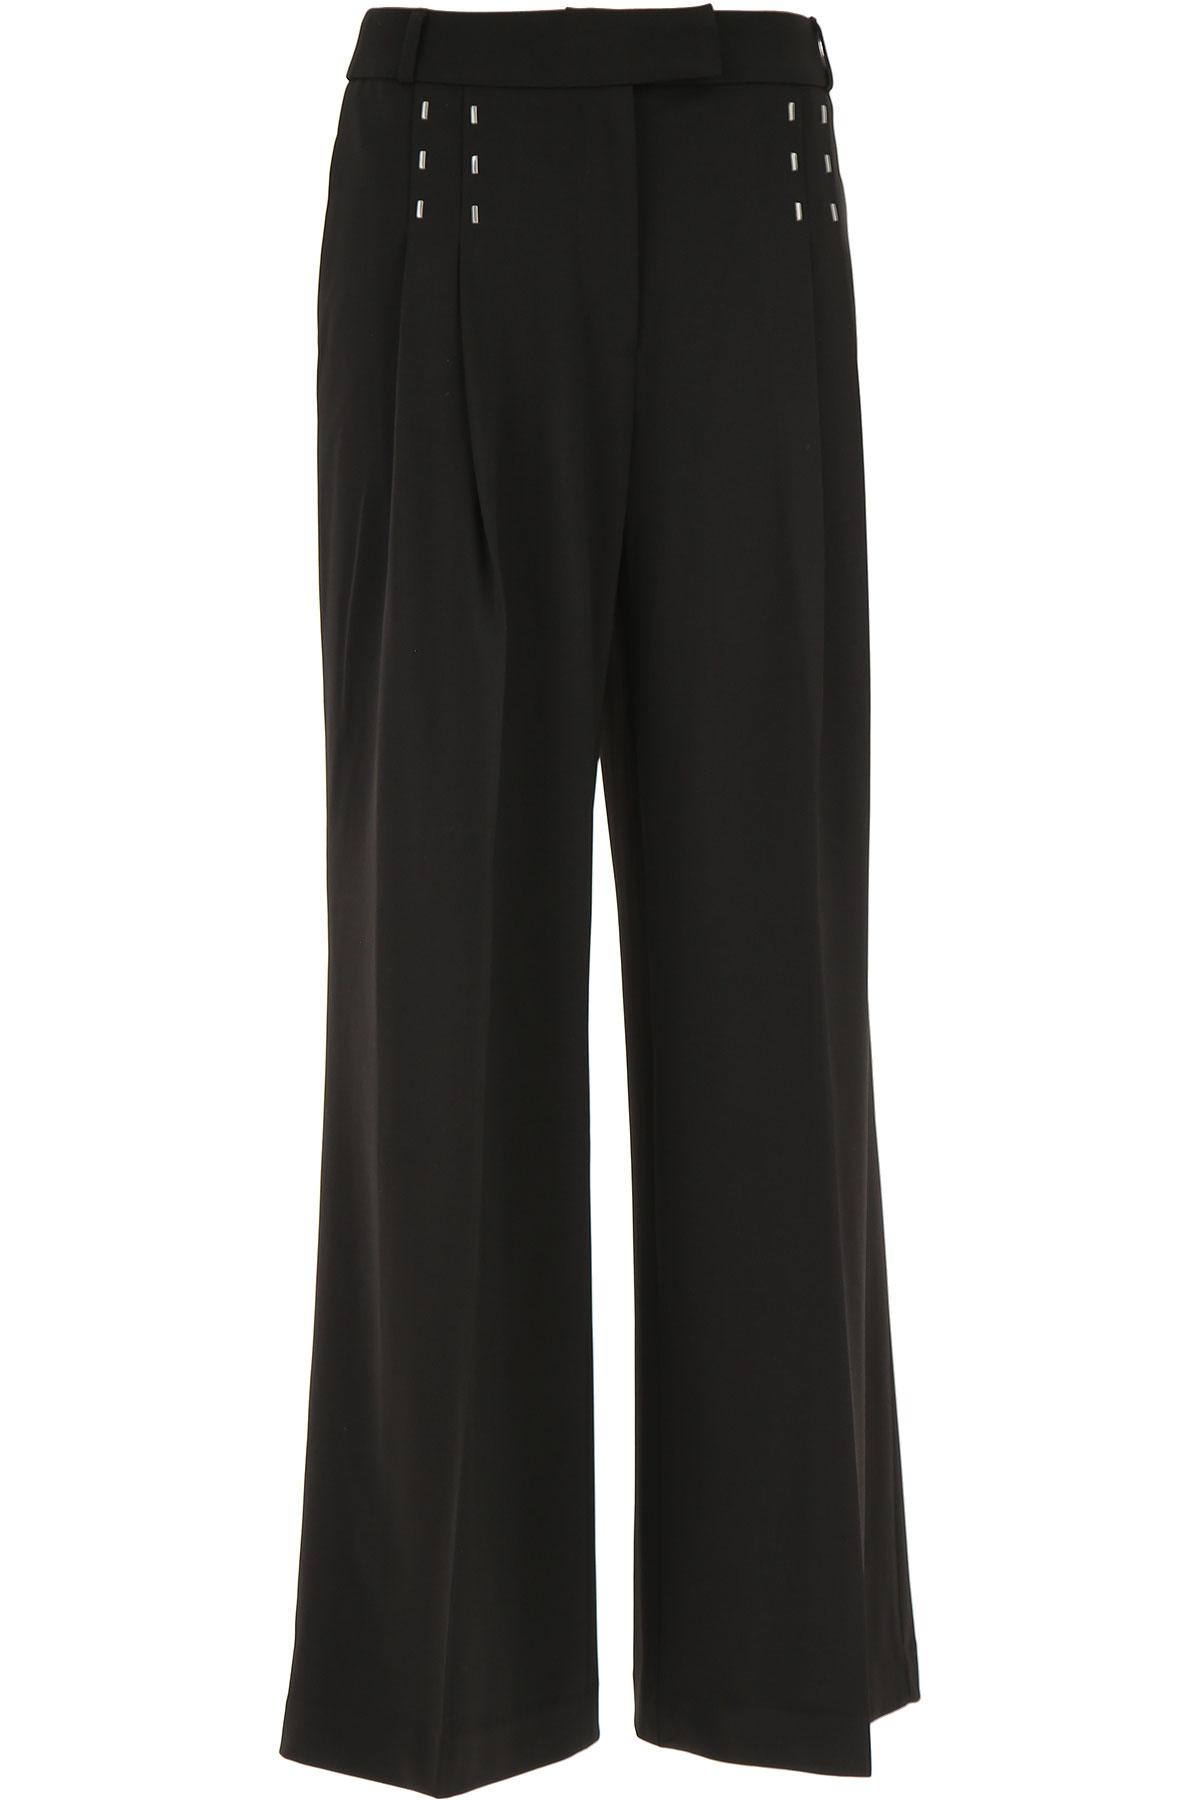 Emporio Armani Synthetic Pants For Women in Black - Lyst